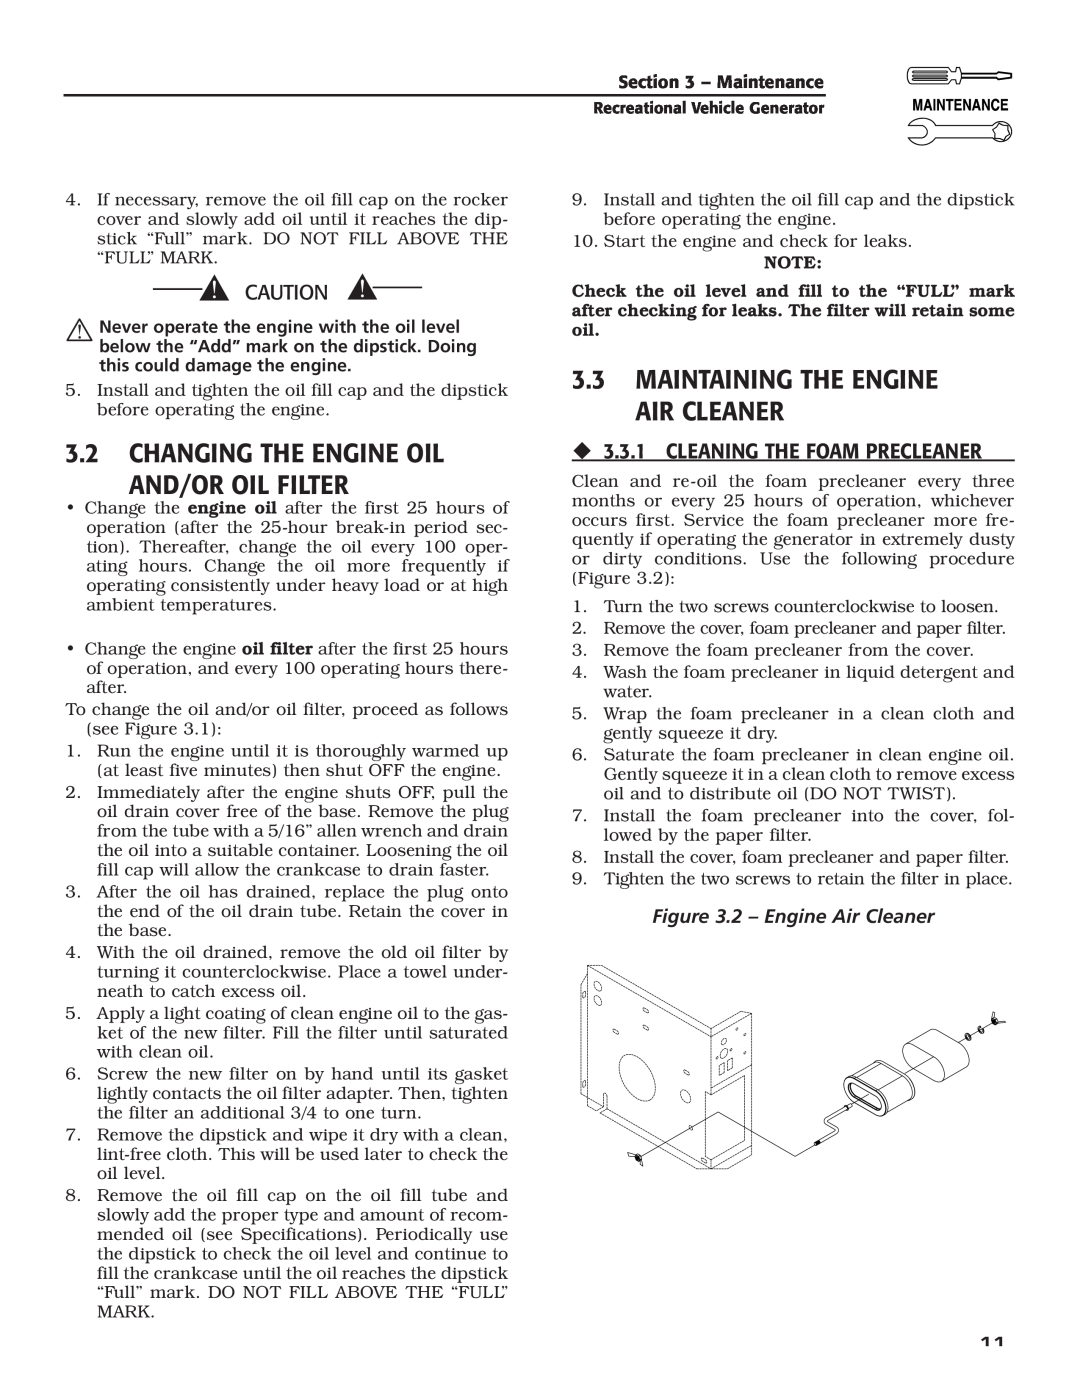 Generac Power Systems 004701-0 3.2CHANGING THE ENGINE OIL AND/OR OIL FILTER, 3.3MAINTAINING THE ENGINE AIR CLEANER 